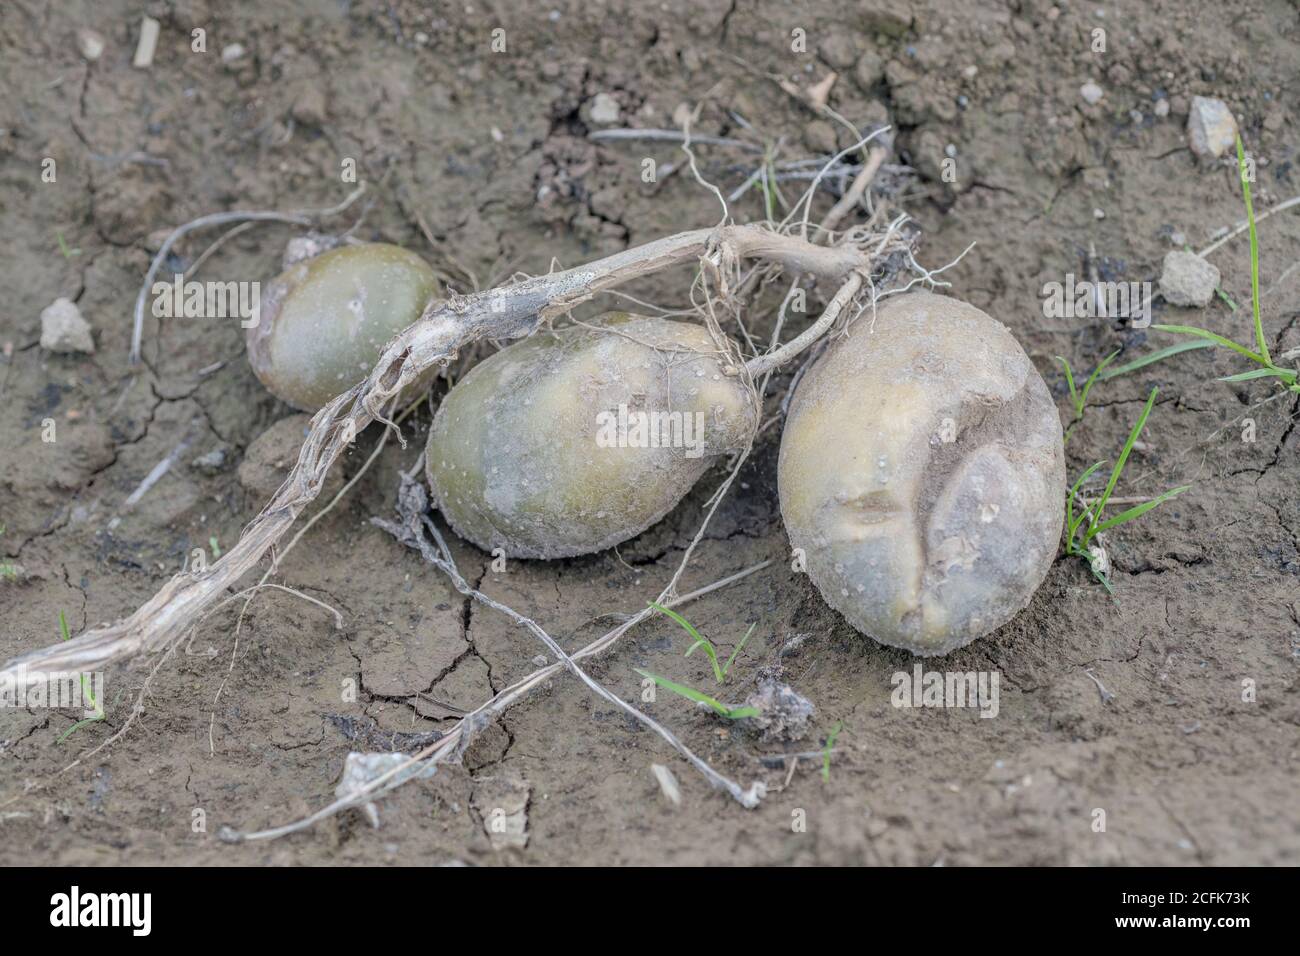 Disease damage / diseased potatoes lying on soil in field. One showing some growth cracks, others have mild potato disease. Stock Photo